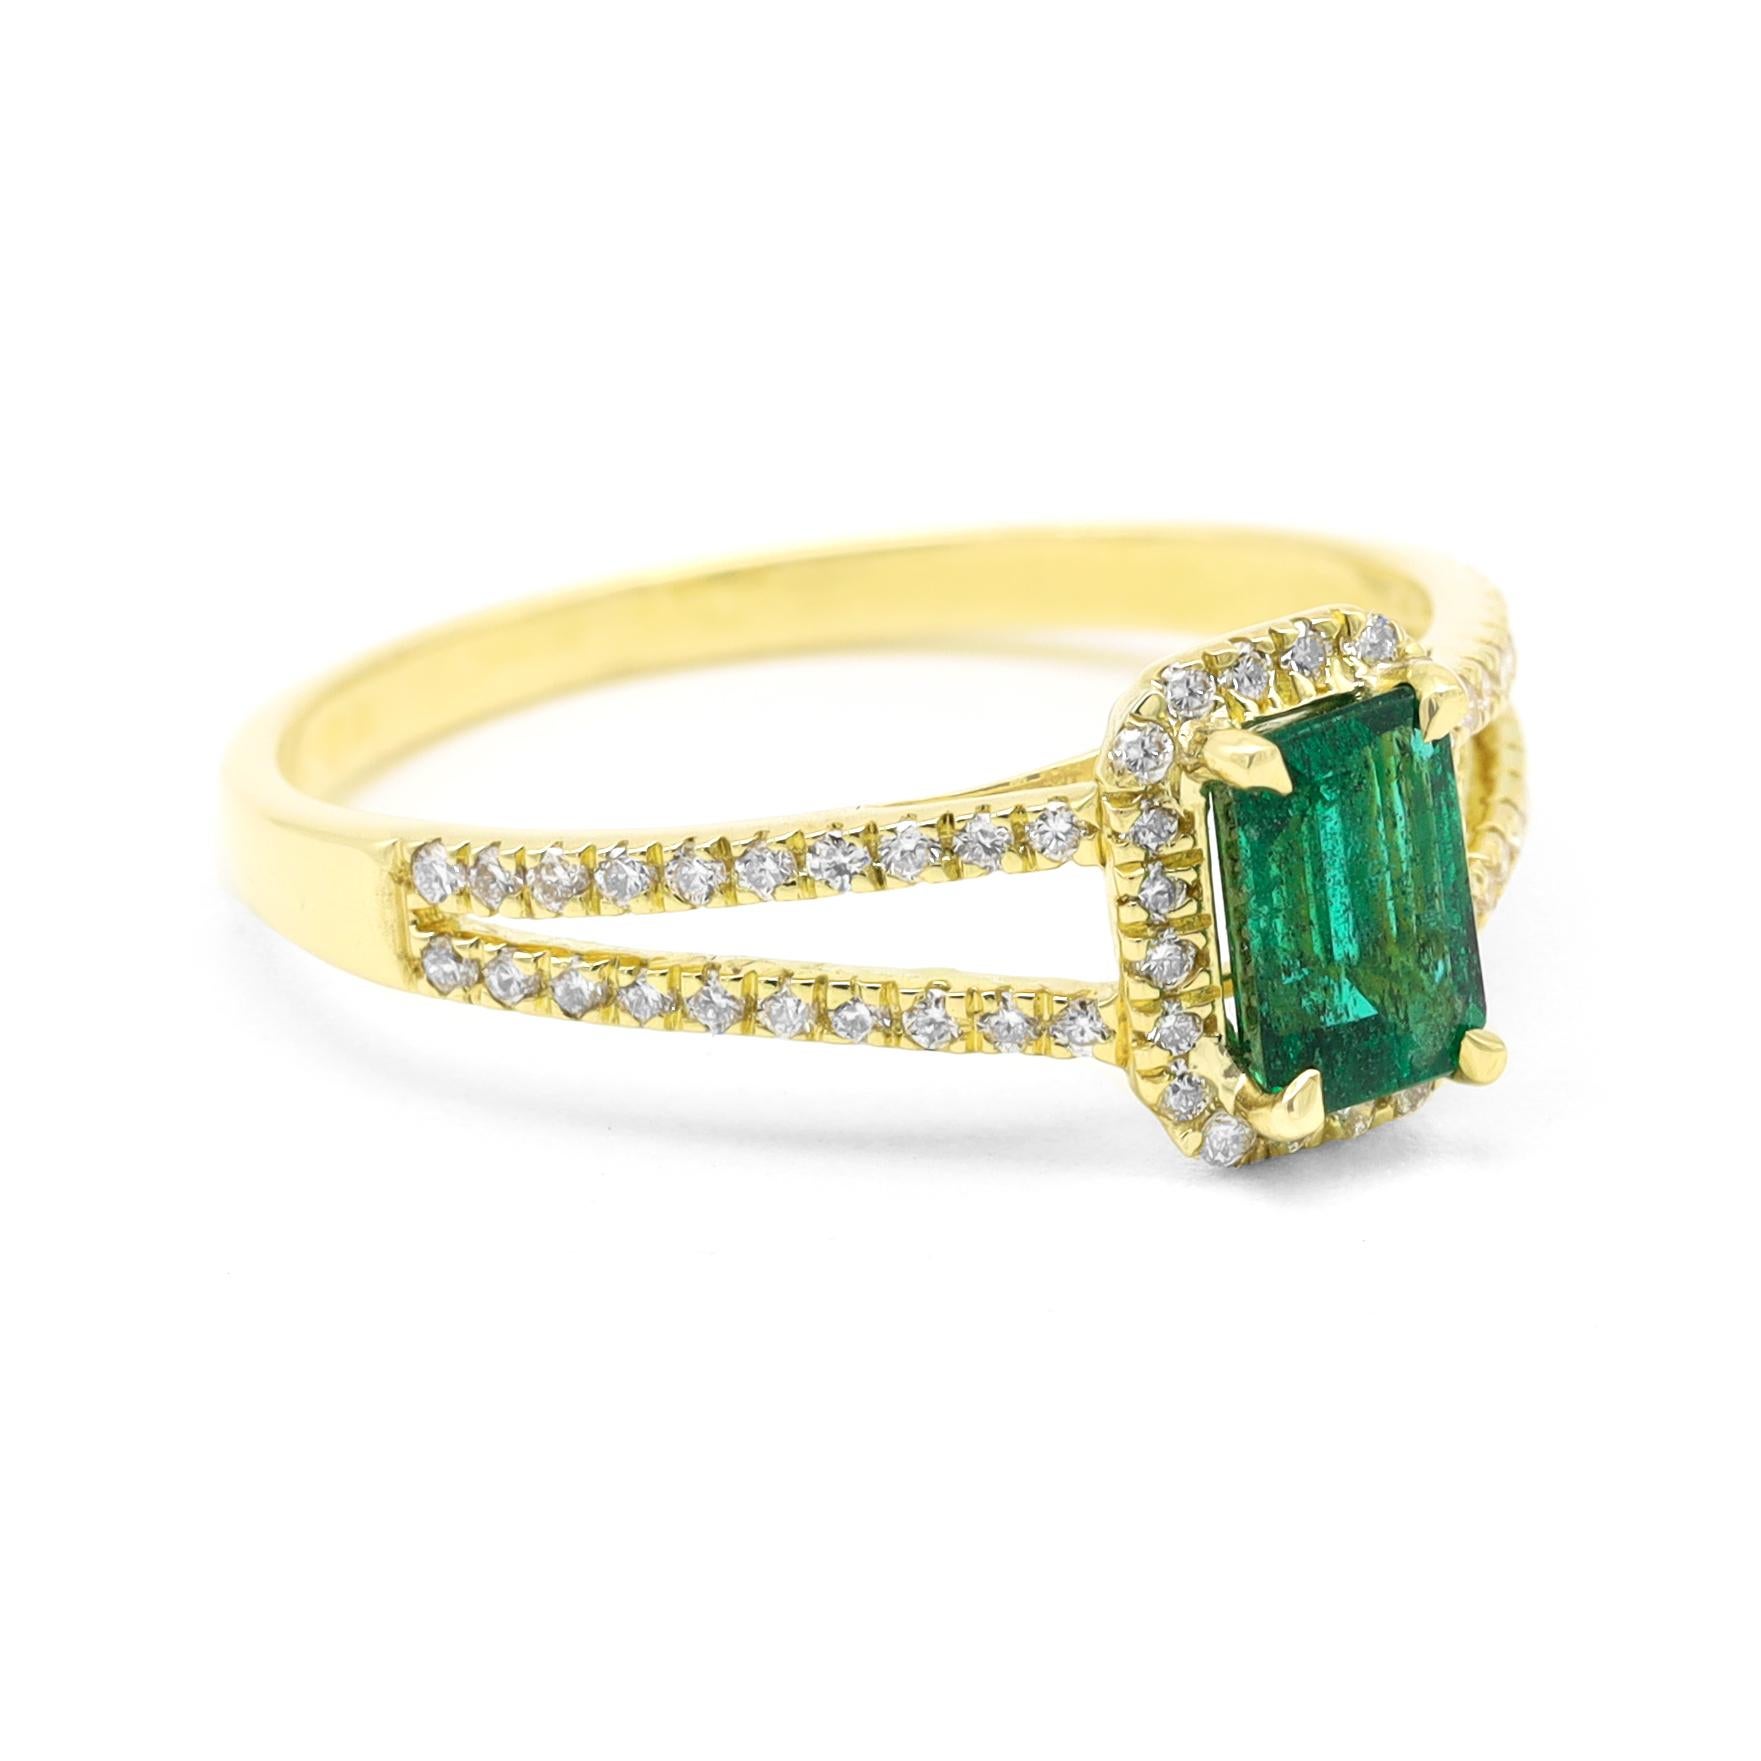 18 Karat Yellow Gold Natural Green Emerald and Diamond Cluster Ring

This typical parakeet vivid green emerald cut emerald and round diamond cluster ring is marvelously captivating. The eagle prong-set incredible emerald-cut emerald is glorified